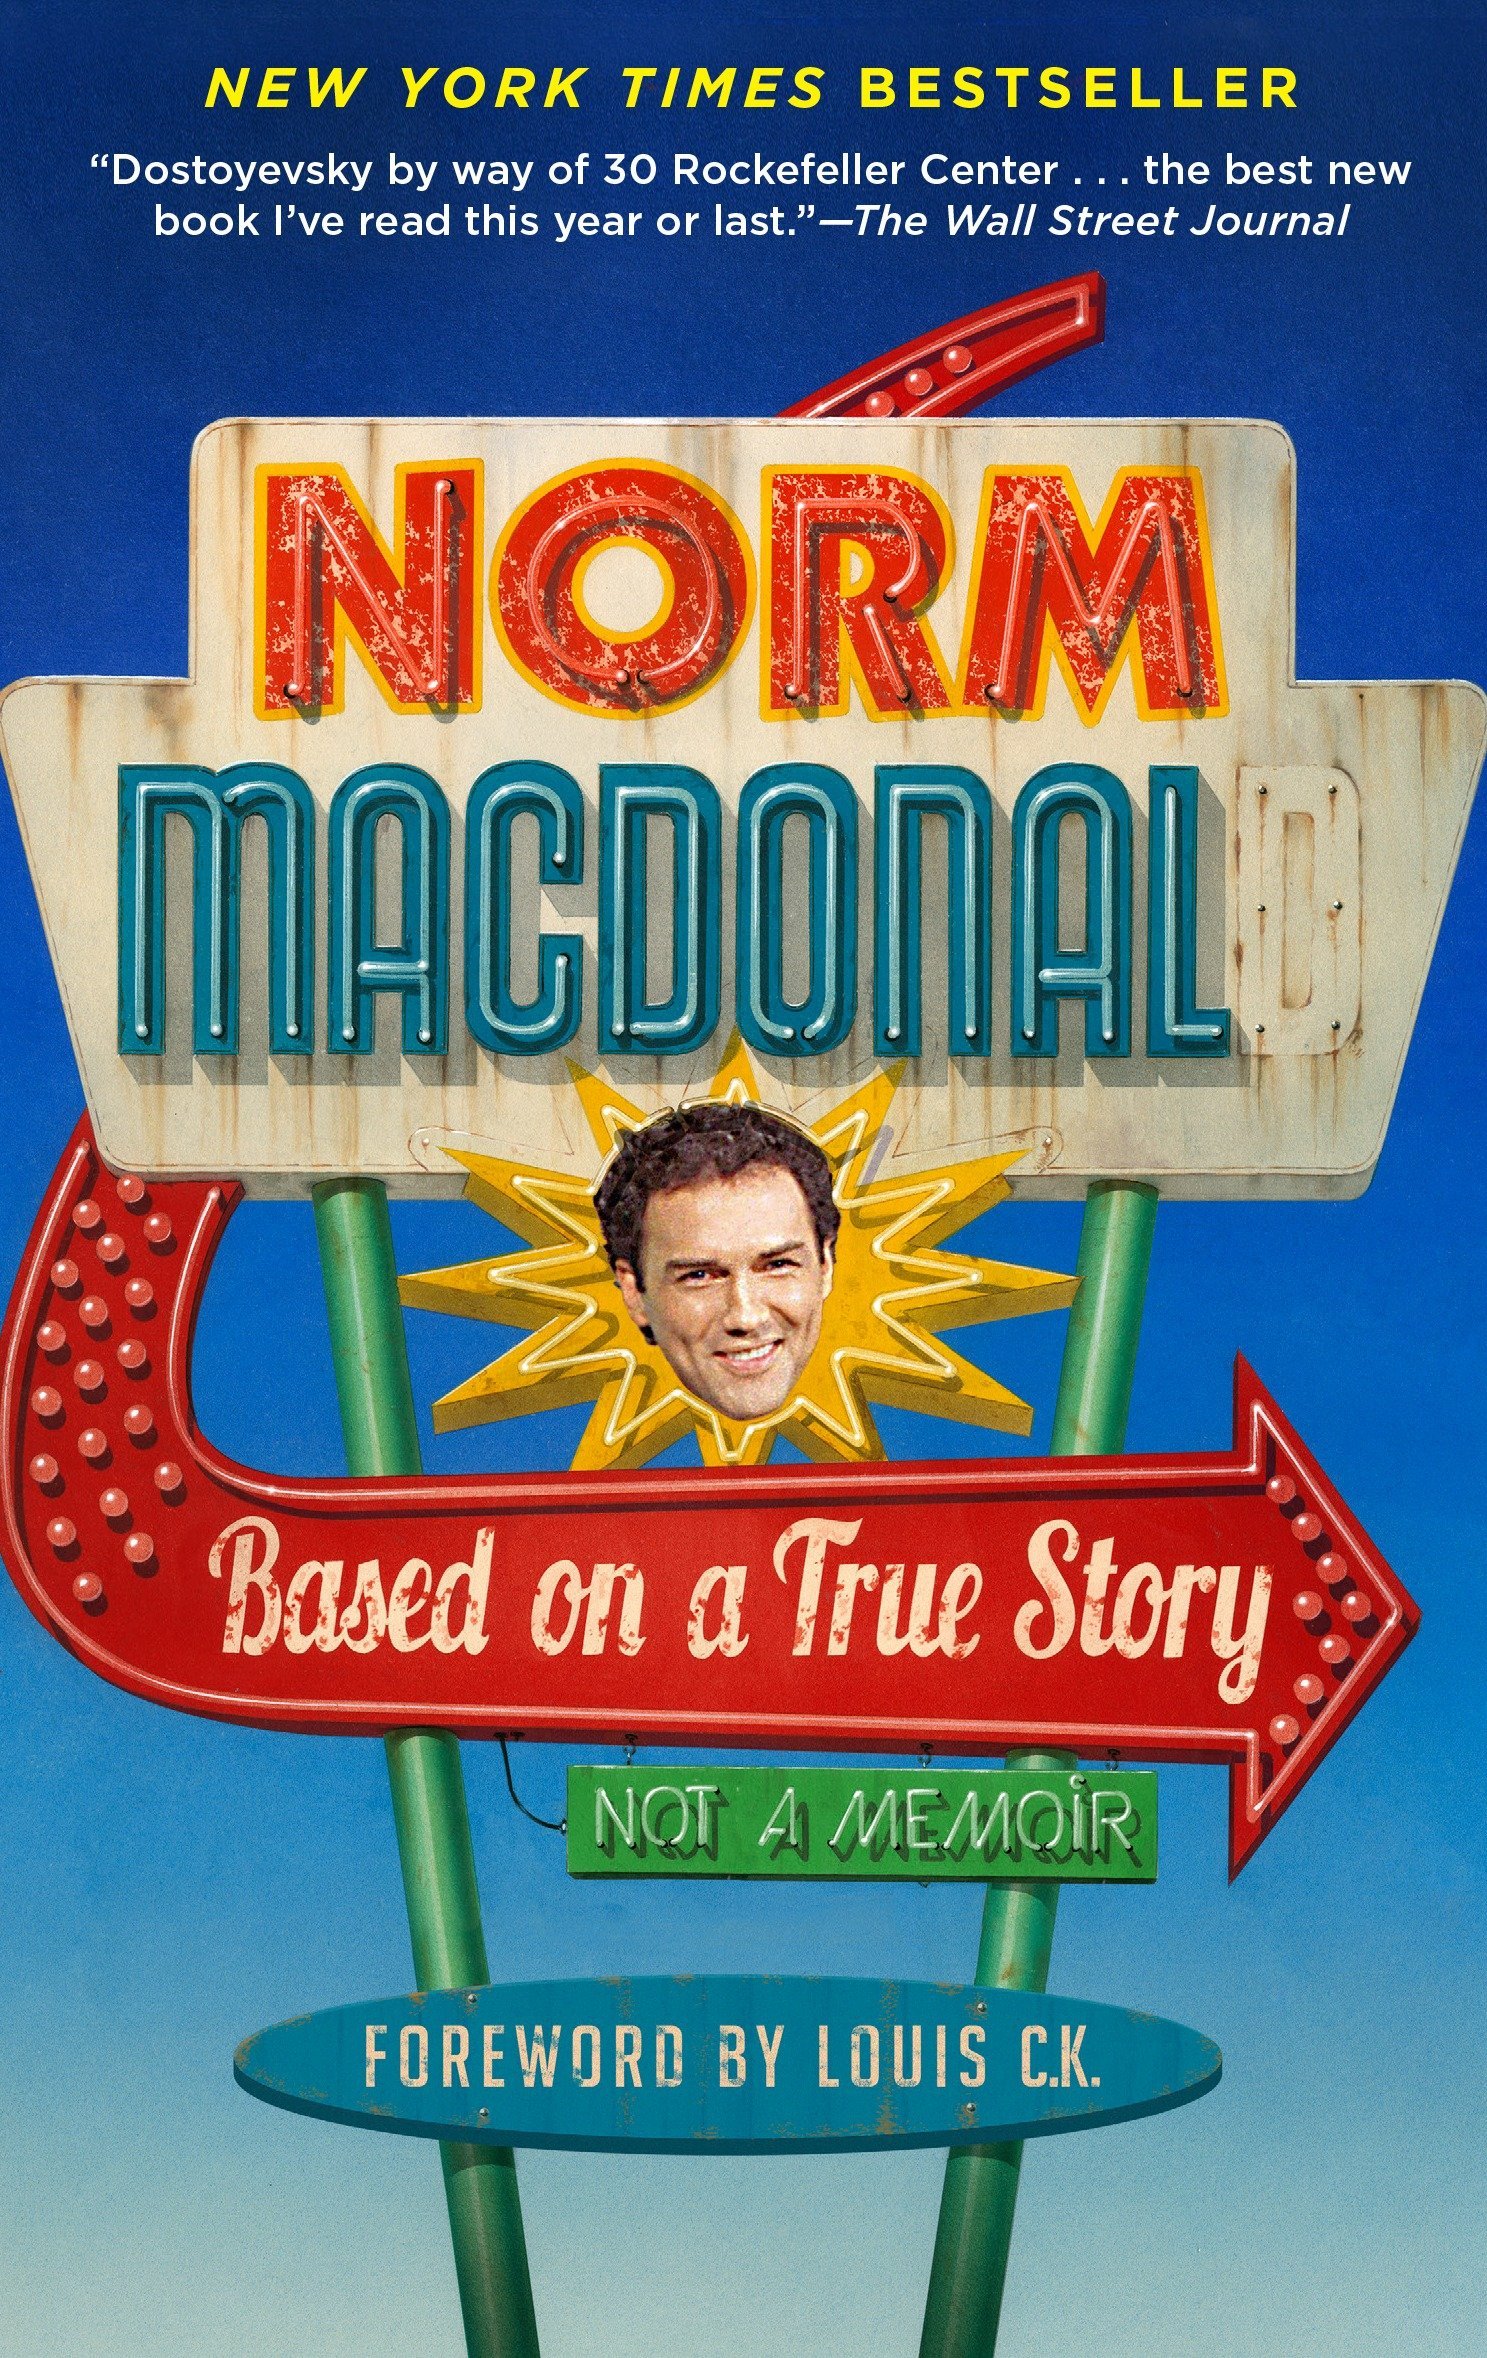 Based on a True Story | Norm Macdonald